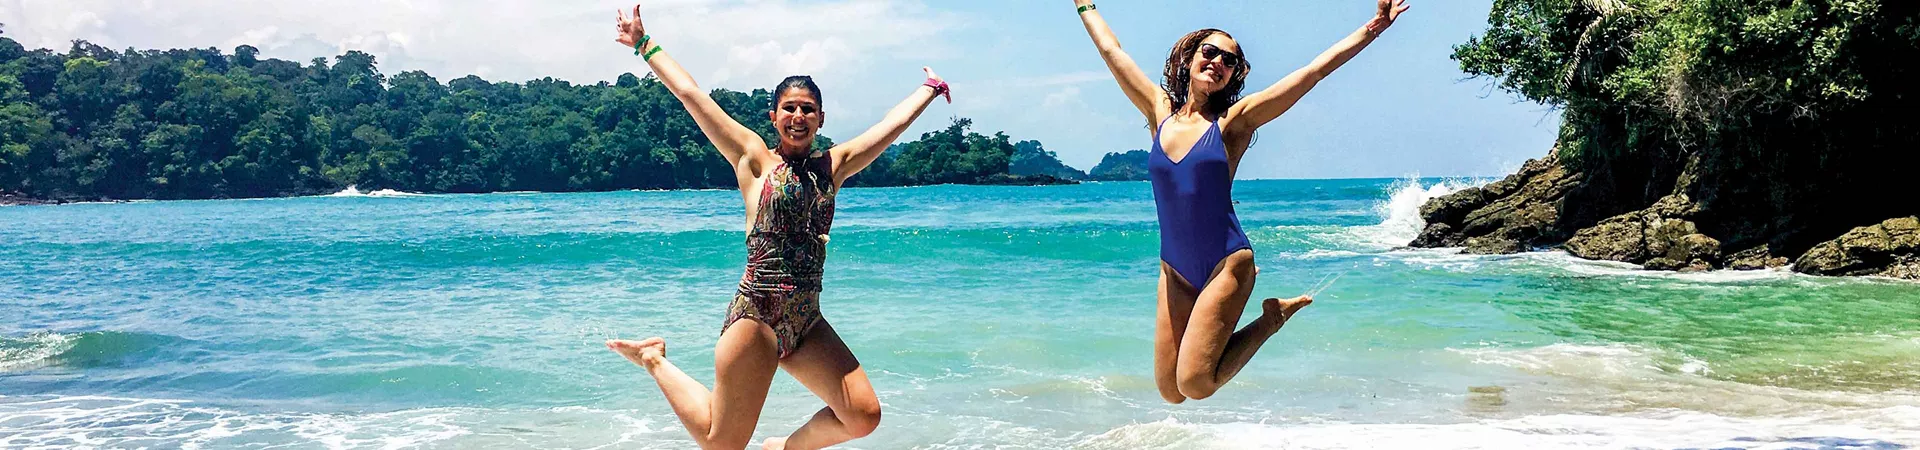 Two Female Travelers Jumping On Beach In Costa Rica